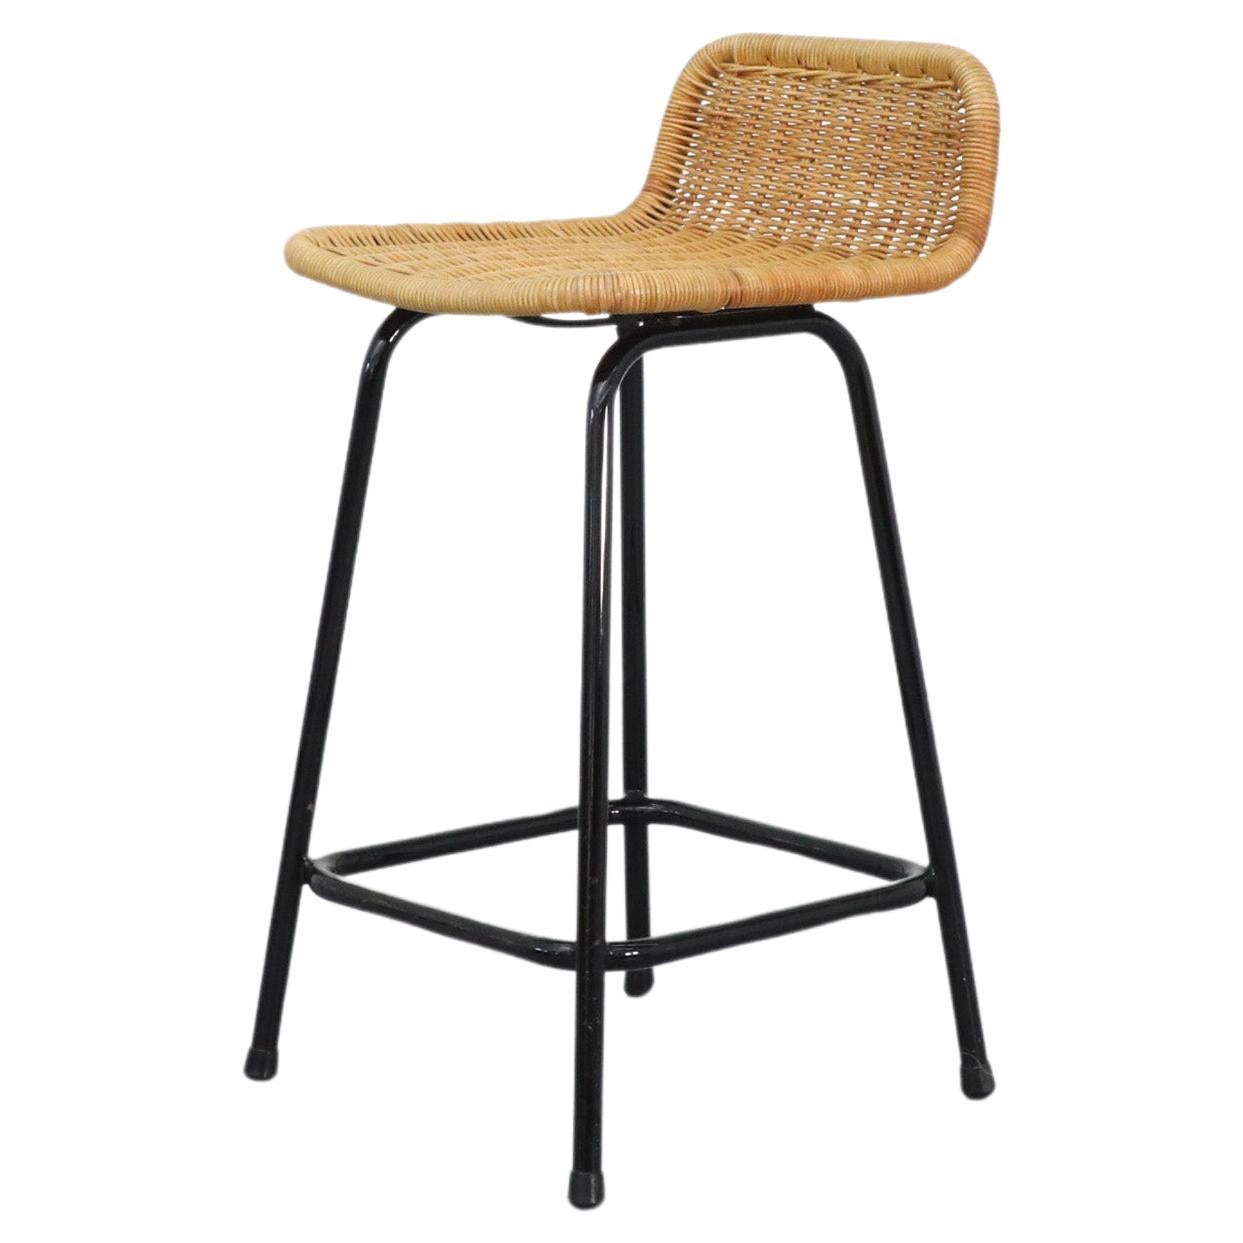 Single Charlotte Perriand Style Wicker Bar Stool by Rohe Noordwolde